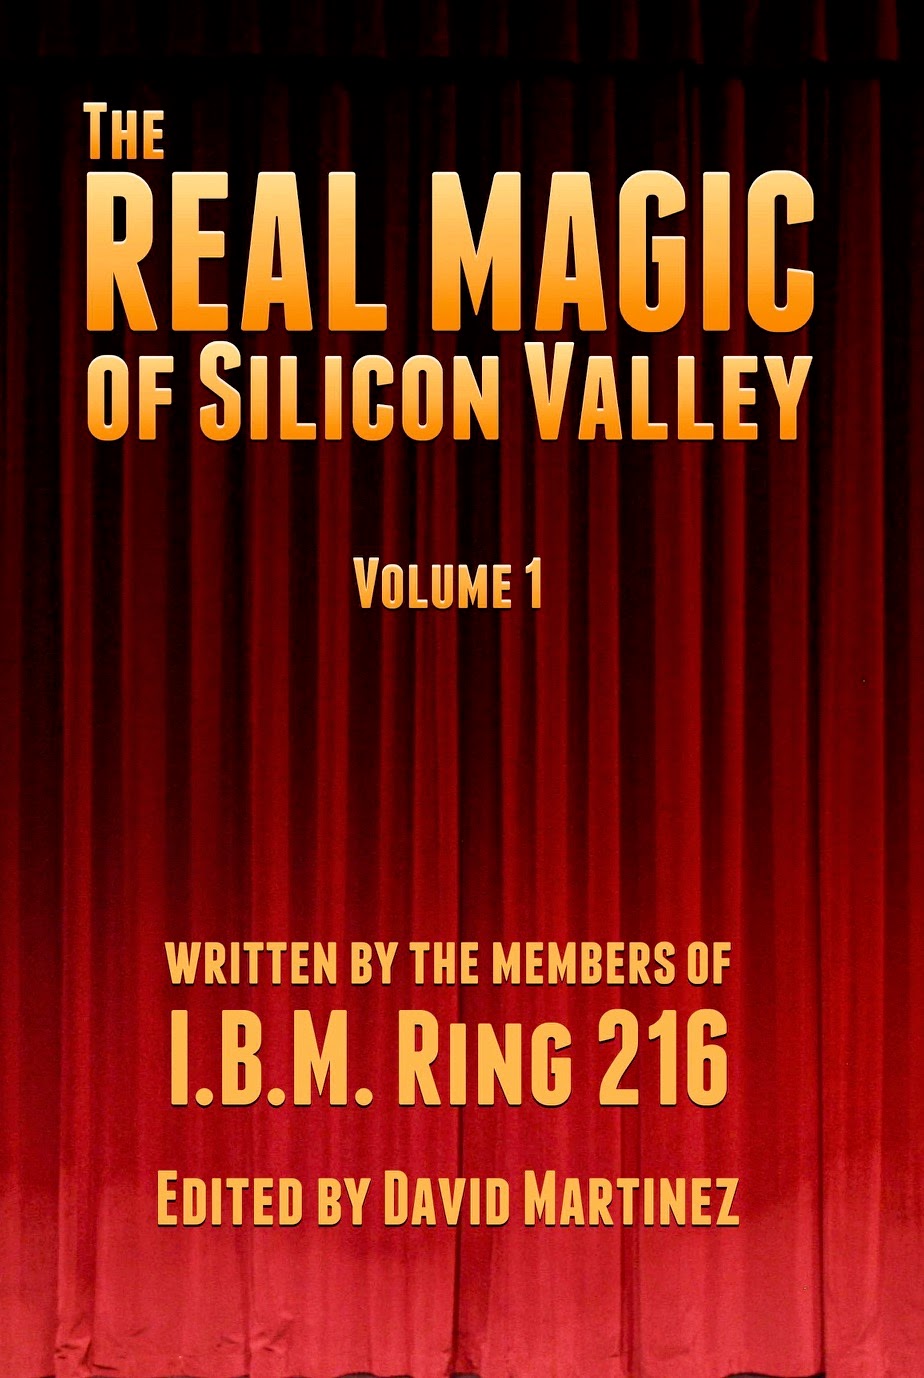 The Real Magic of Silicon Valley, Vol. 1 book cover